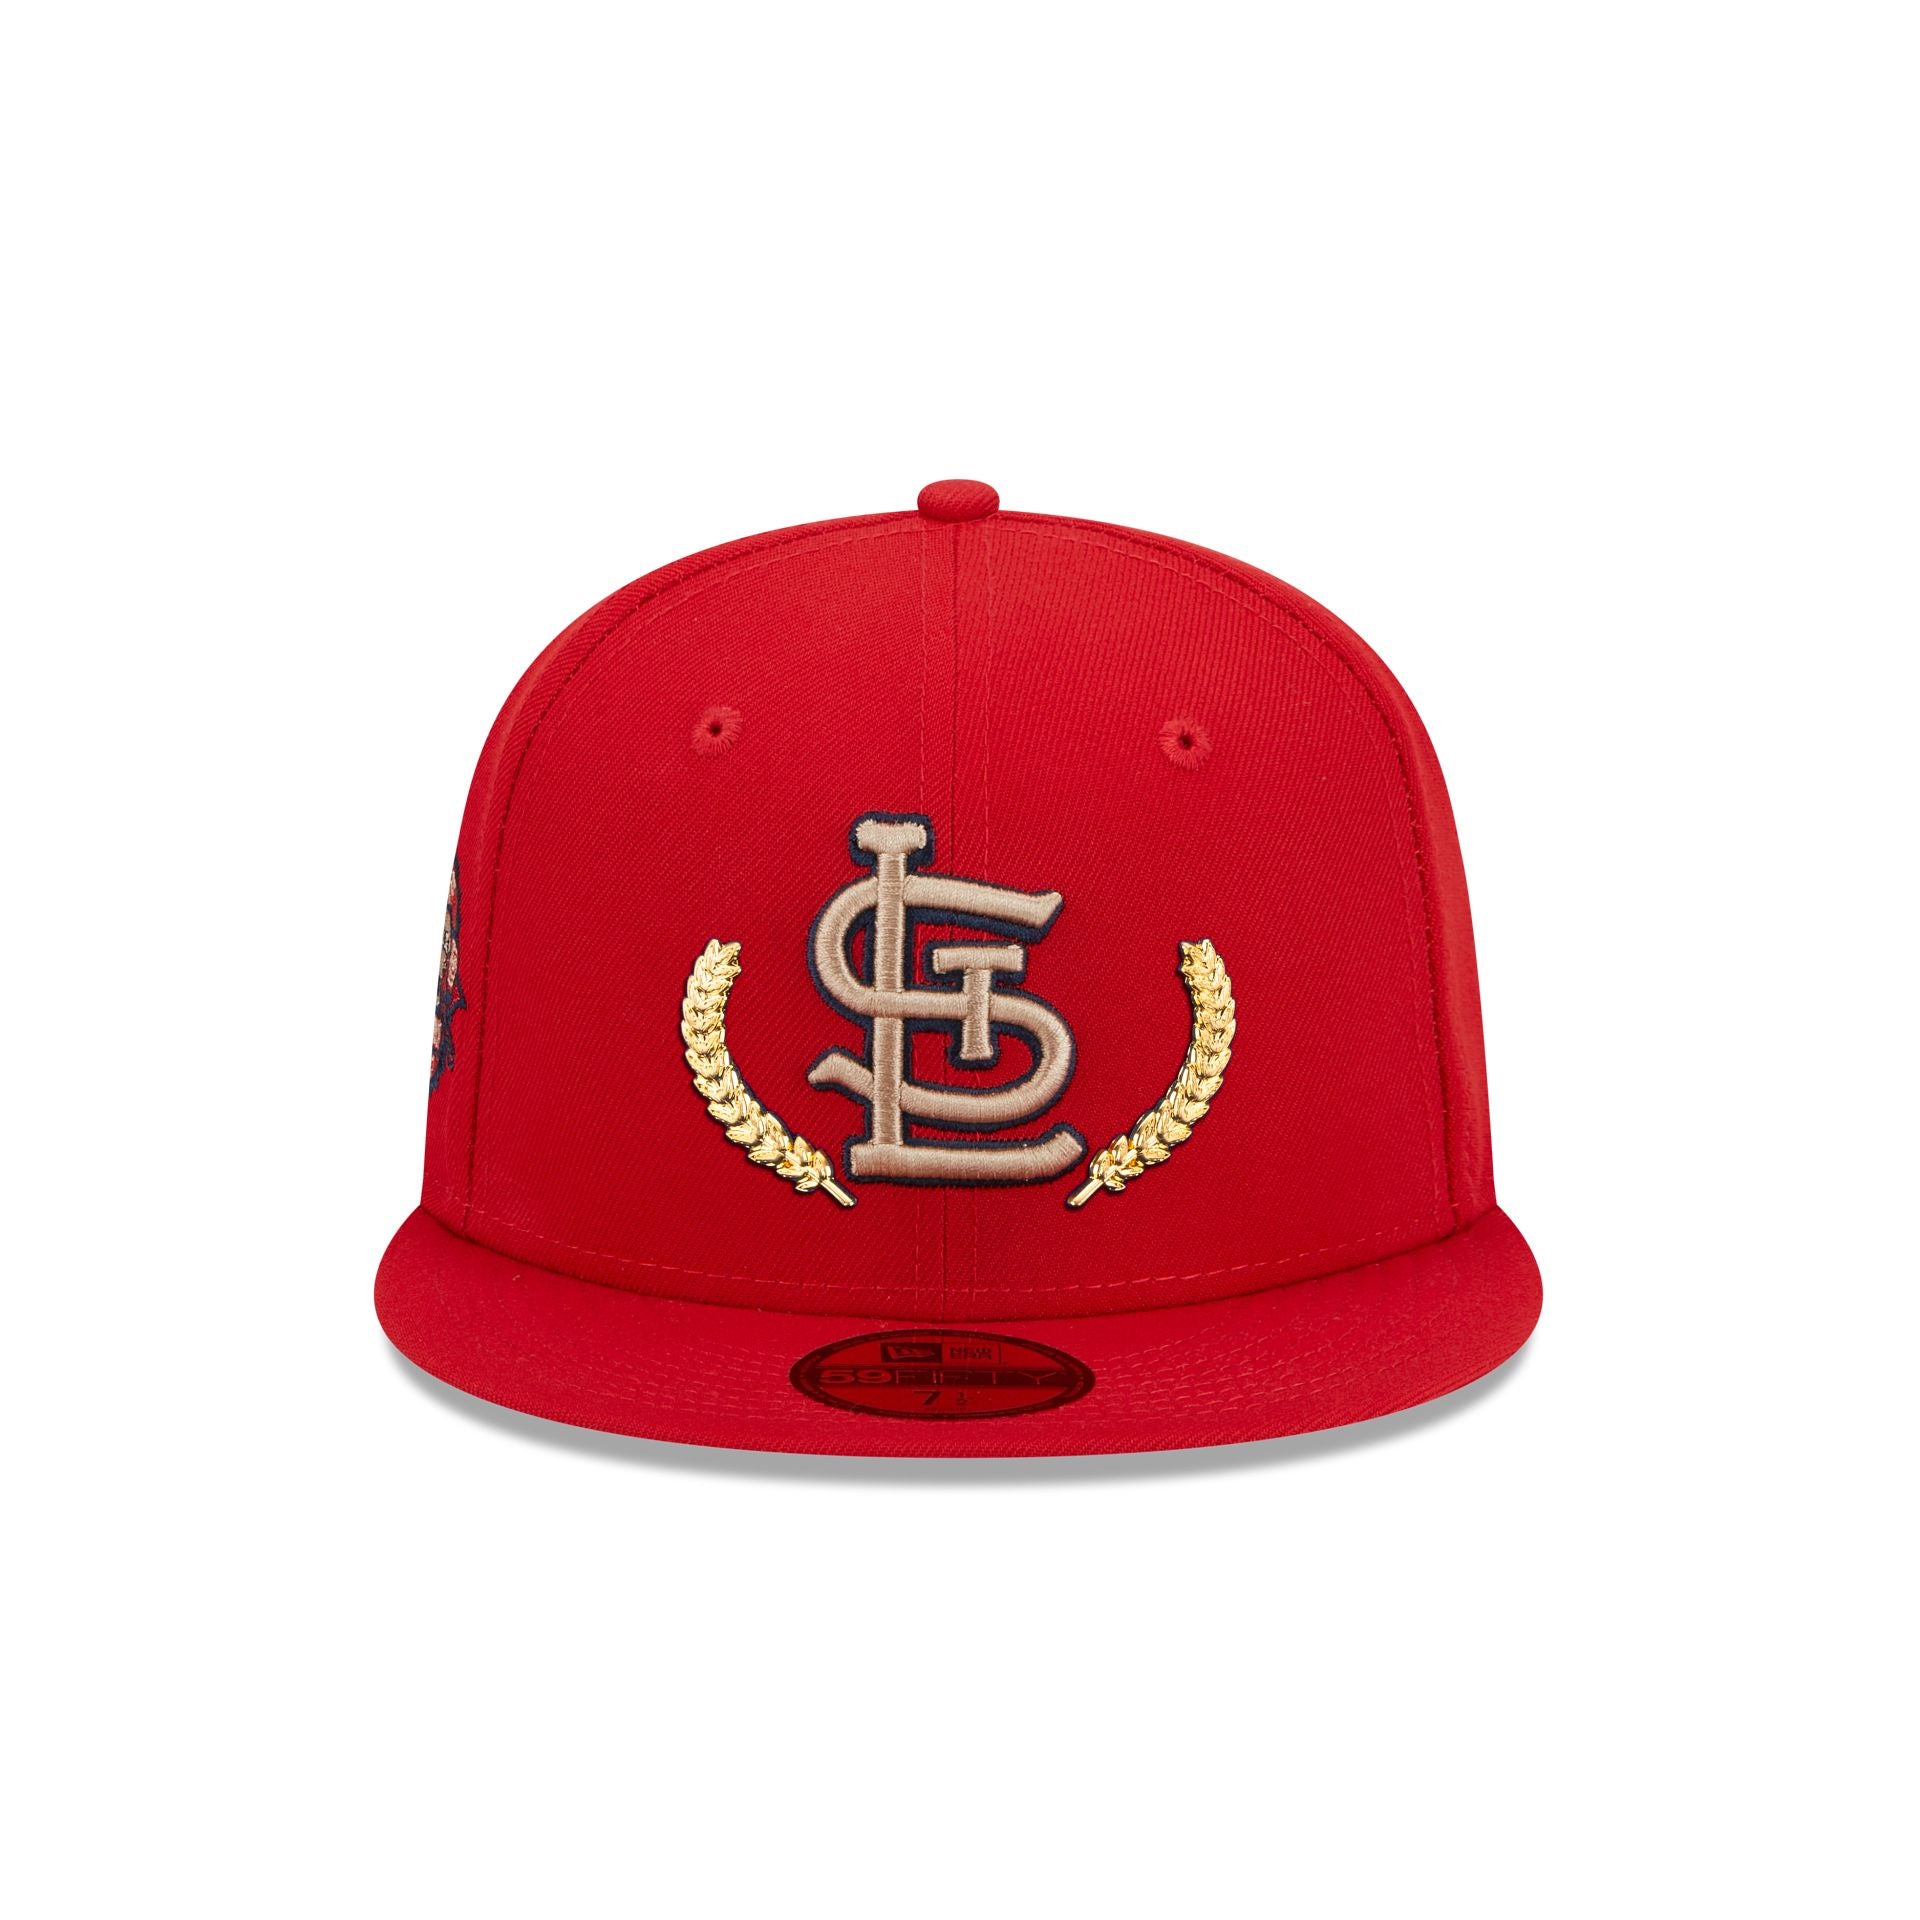 St. Louis Cardinals New Era Retro 59FIFTY Fitted Hat - Stone/Red